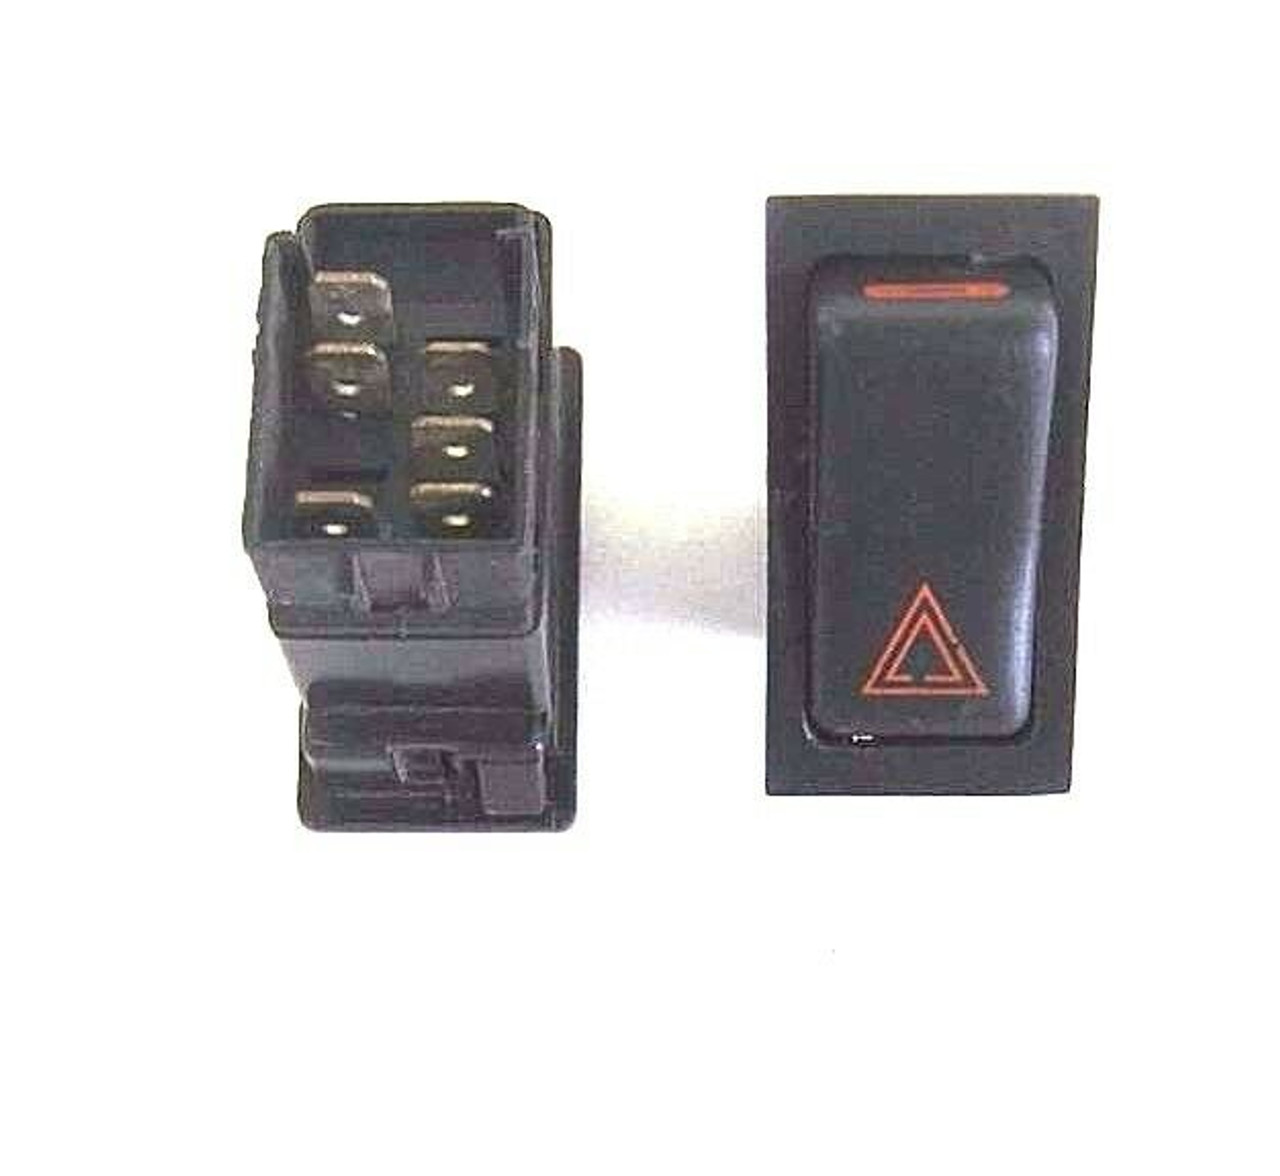 Mahindra Tractor SWITCH Cpte Hazard 005558699R91